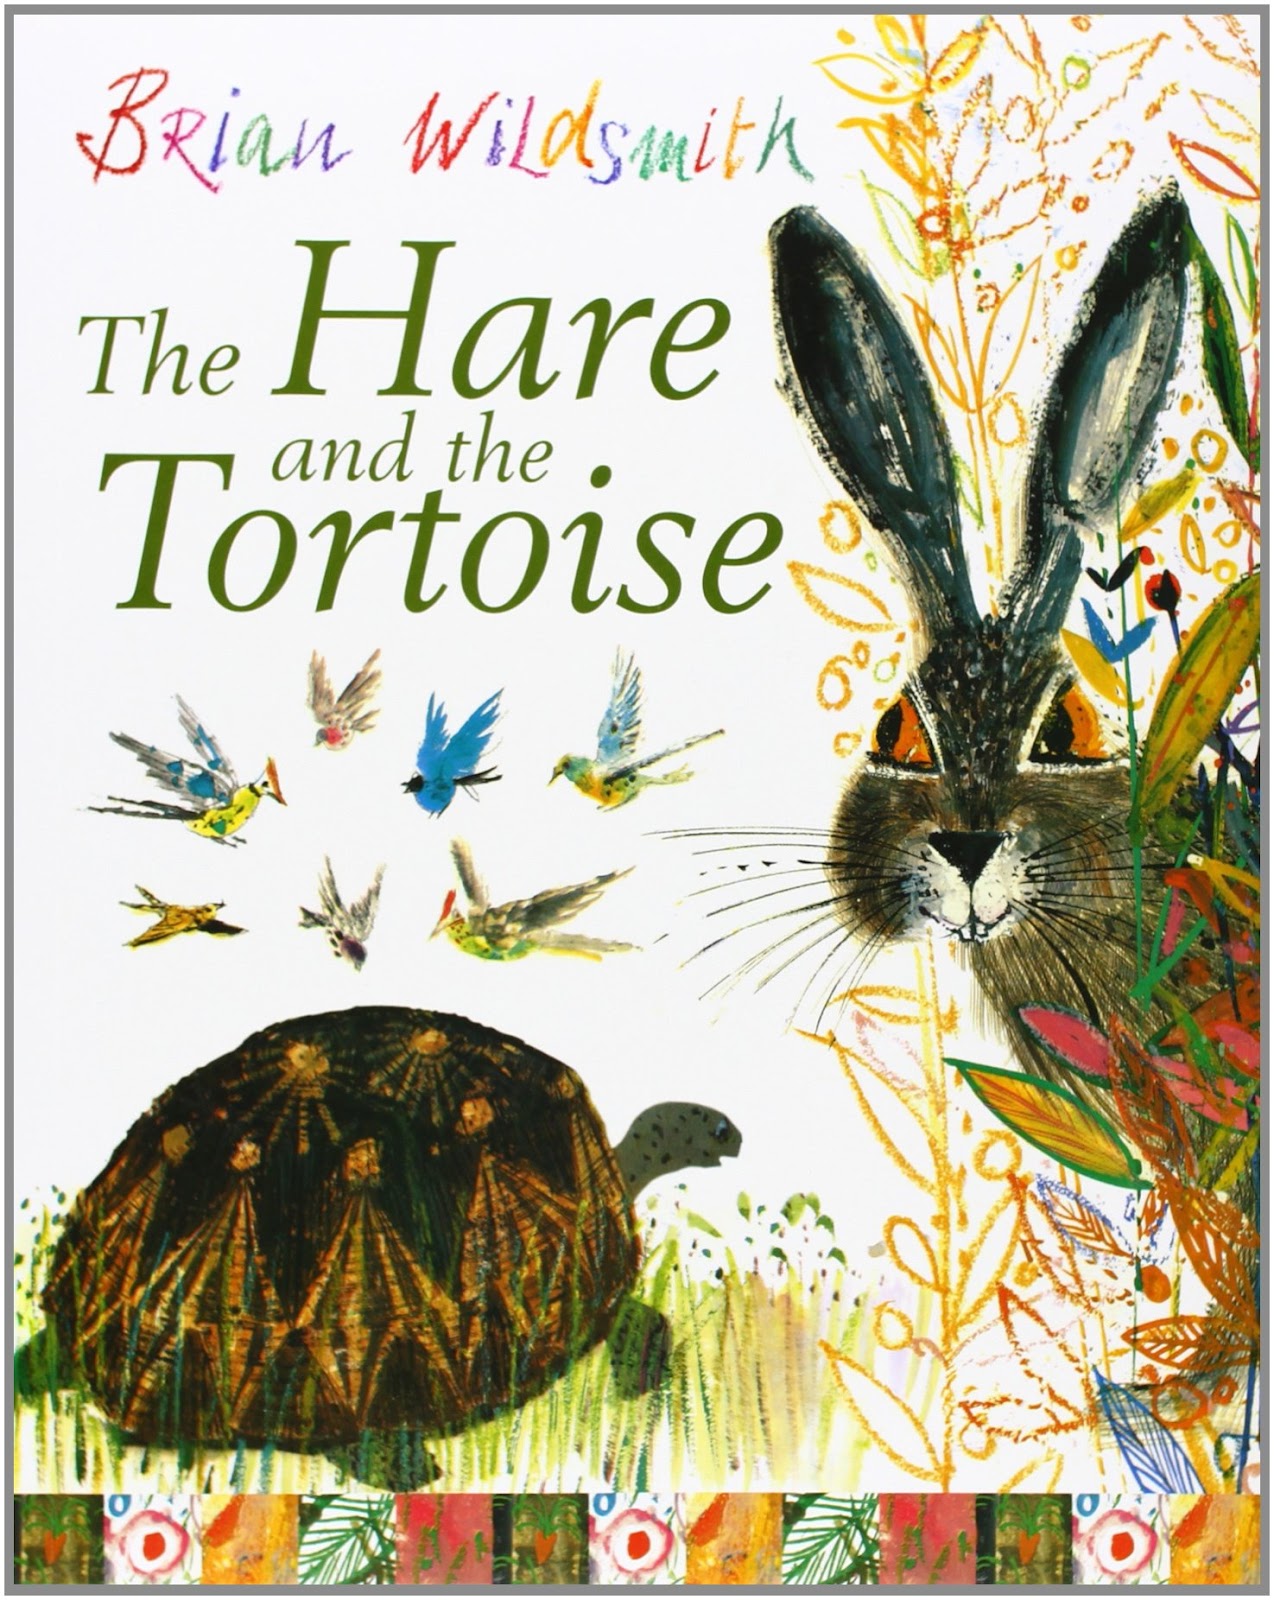 The Hare and the Tortoise: Amazon.co.uk: Wildsmith, Brian: 9780192727084:  Books